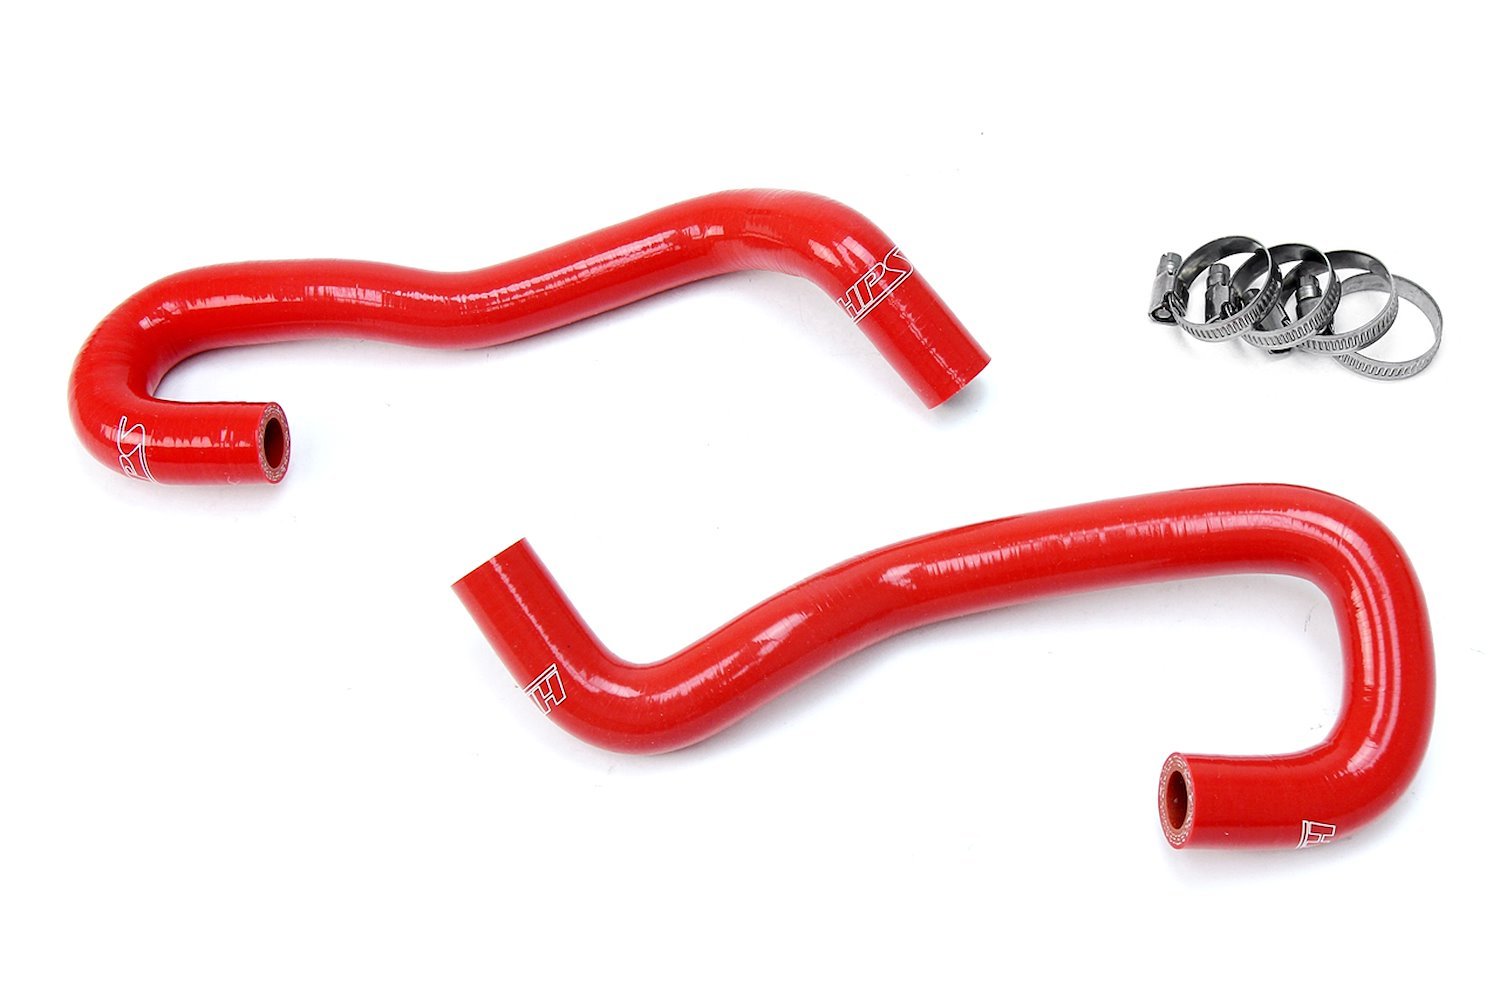 57-1700-RED Heater Hose Kit, High-Temp 3-Ply Reinforced Silicone, Replace OEM Rubber Heater Coolant Hoses